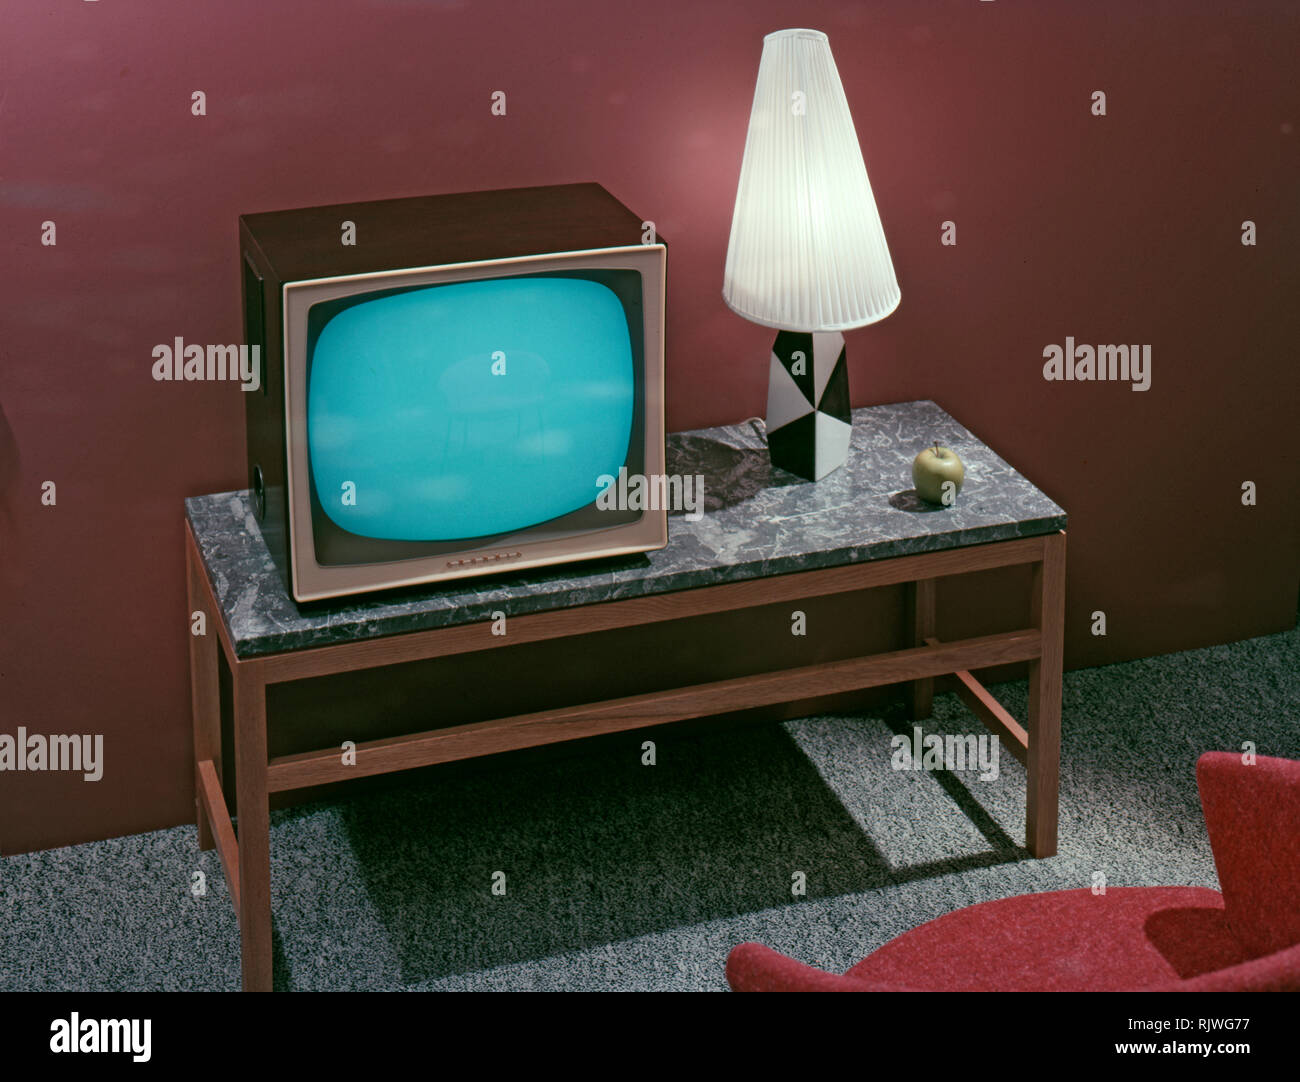 Television in the 1950s. A Grundig television set that was available for customers 1957. A typical 1950s design with a wooden case standing on thin legs. ref BV65-2 Stock Photo